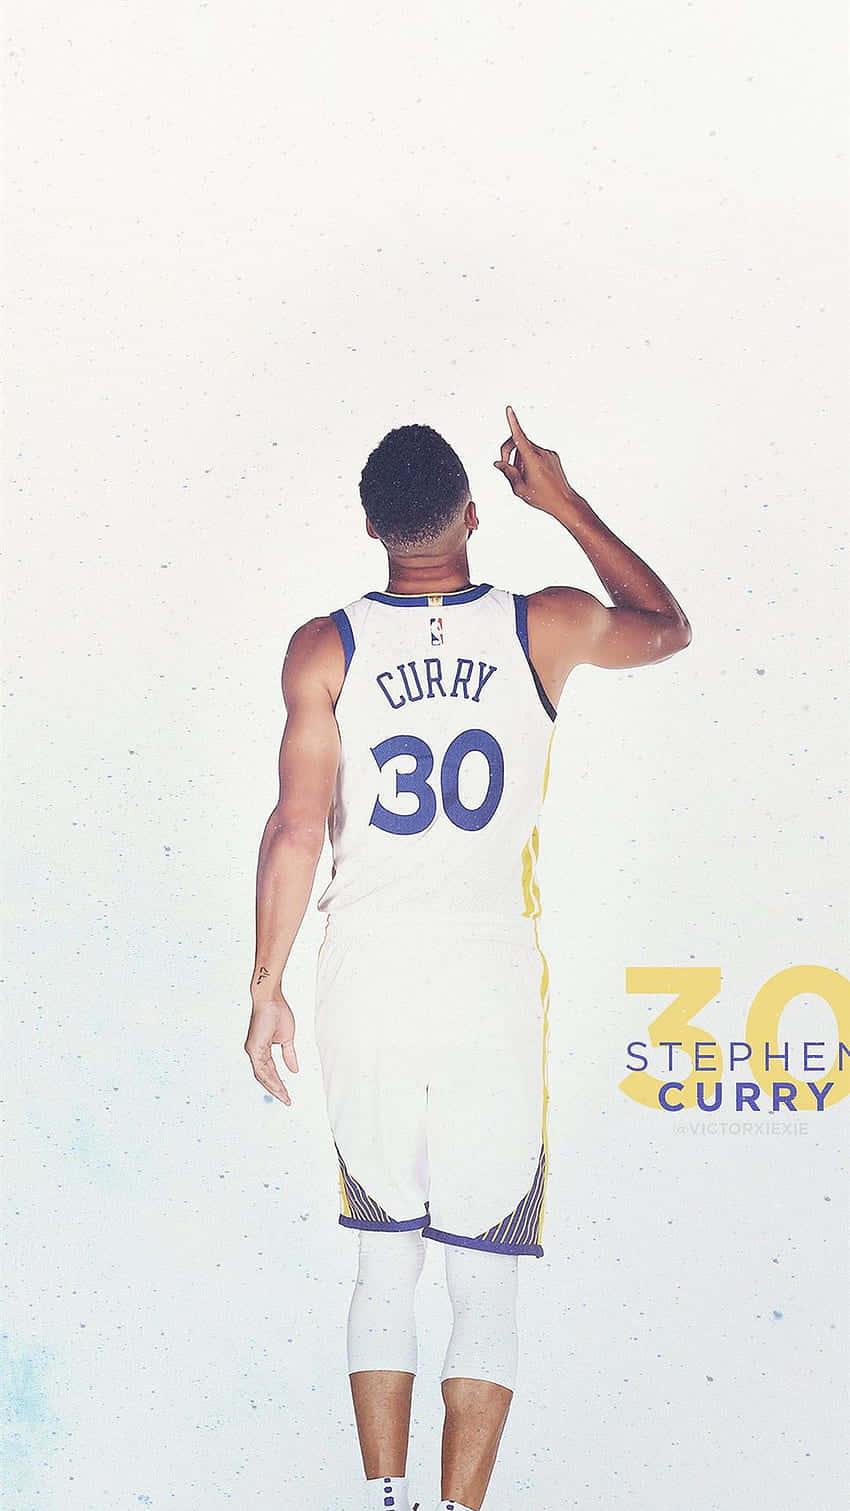 “Steph Curry: Leader of the Golden State Warriors” Wallpaper